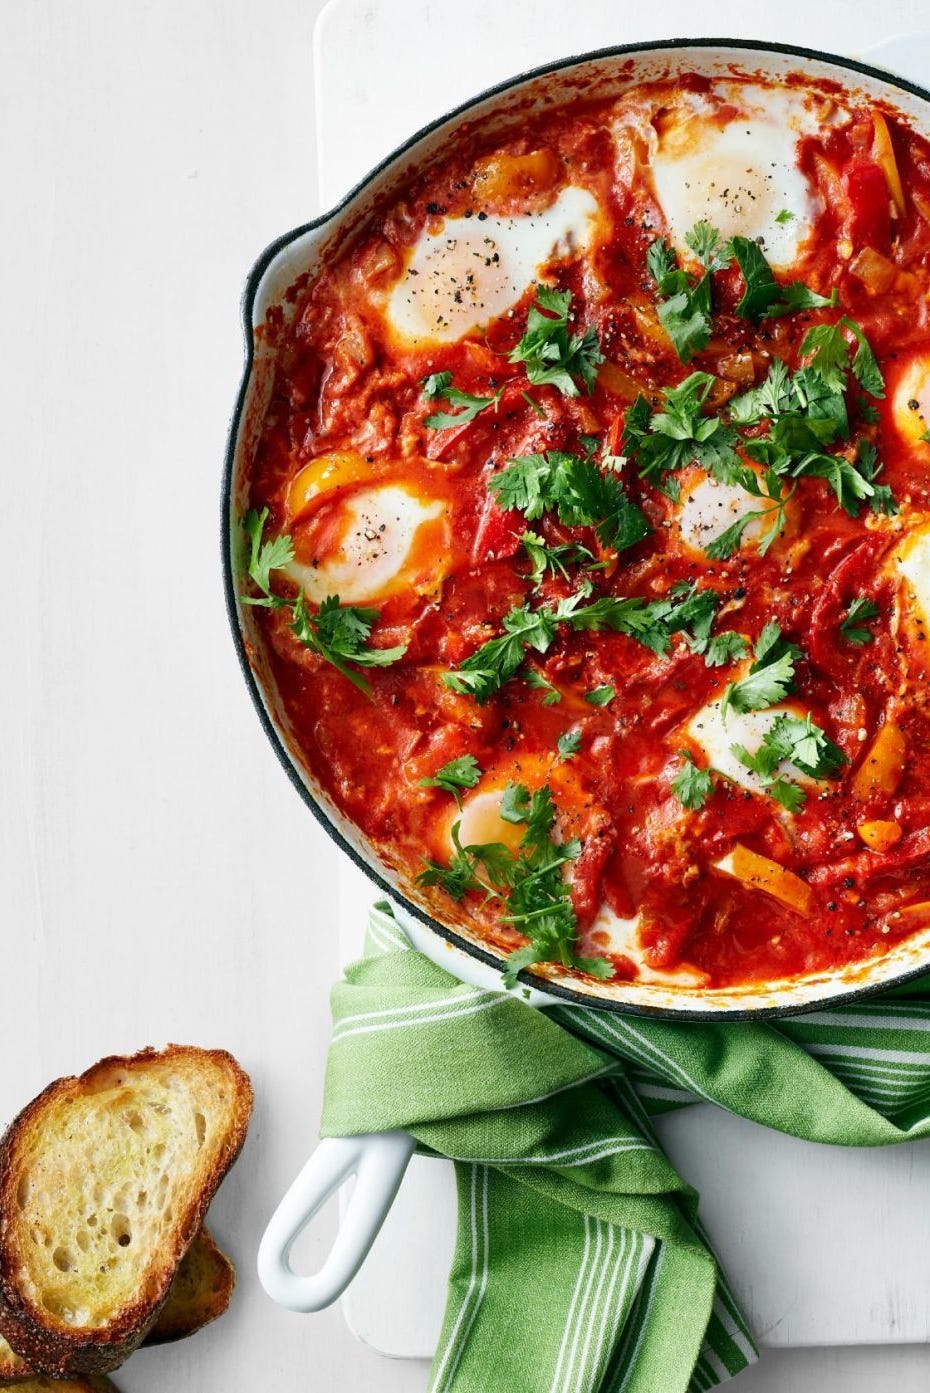 stewed peppers and tomatoes with eggs in skillet with bread